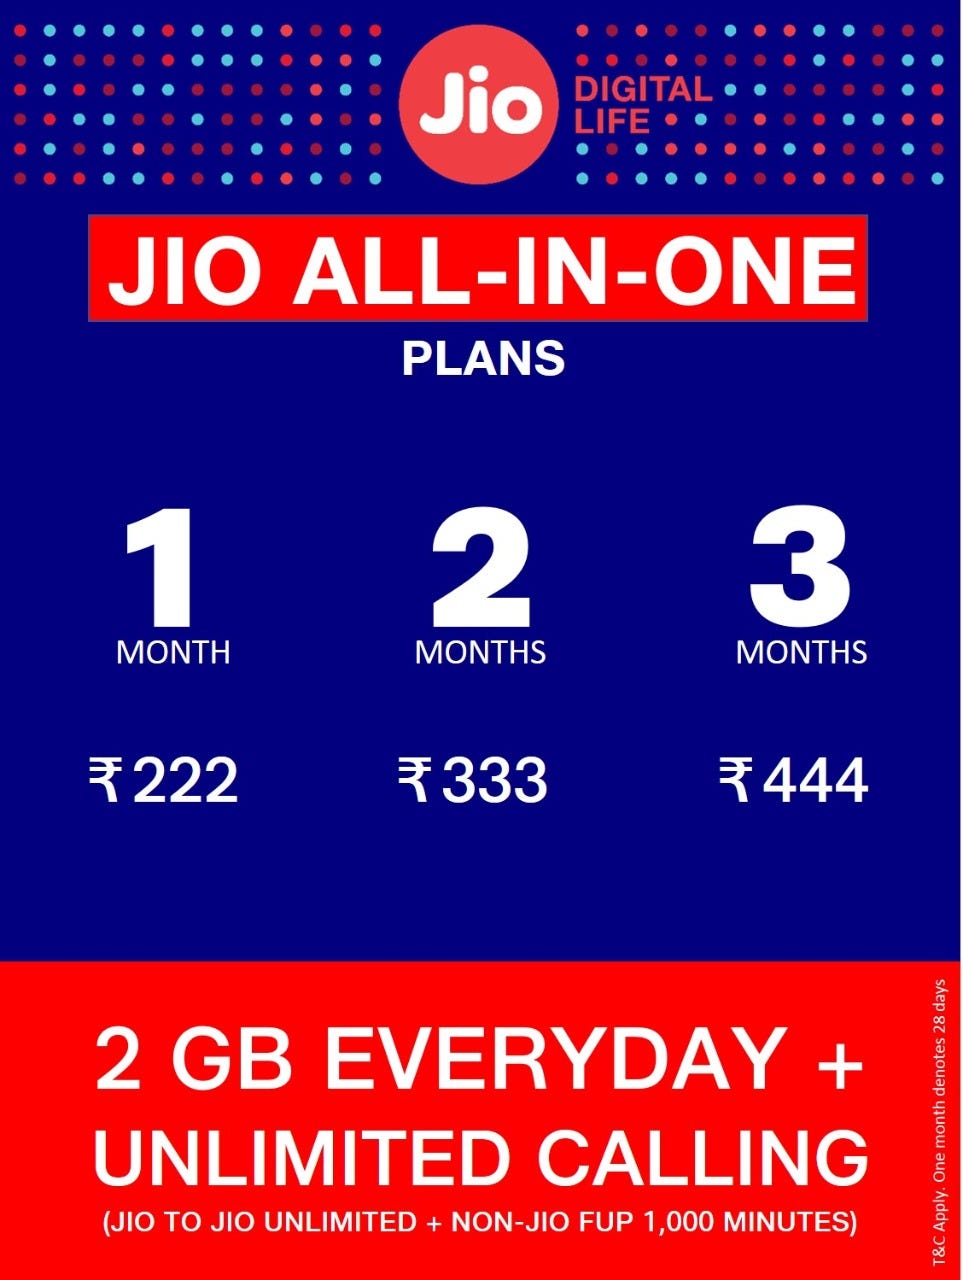 All In One Or Just Another One Reliance Jio Announces New All In